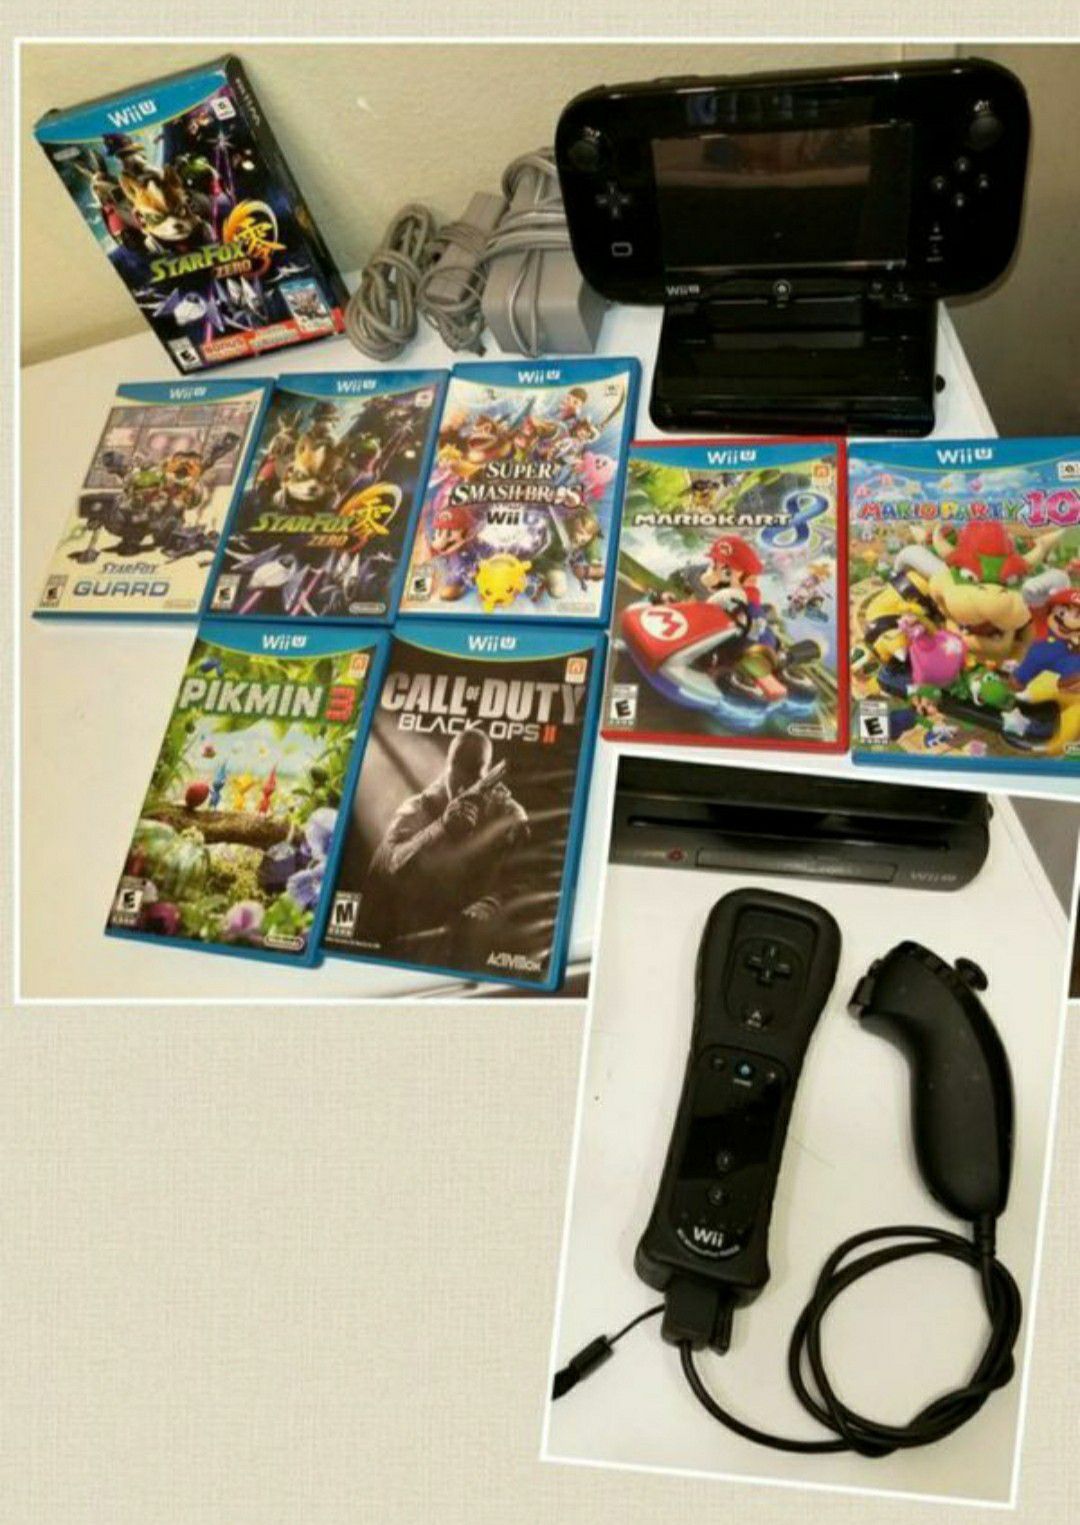 NINTENDO Wii U 32GB BLACK DELUXE BUNDLE W/7 AWESOME GAMES & XTRA MOTION+ WIIMOTE